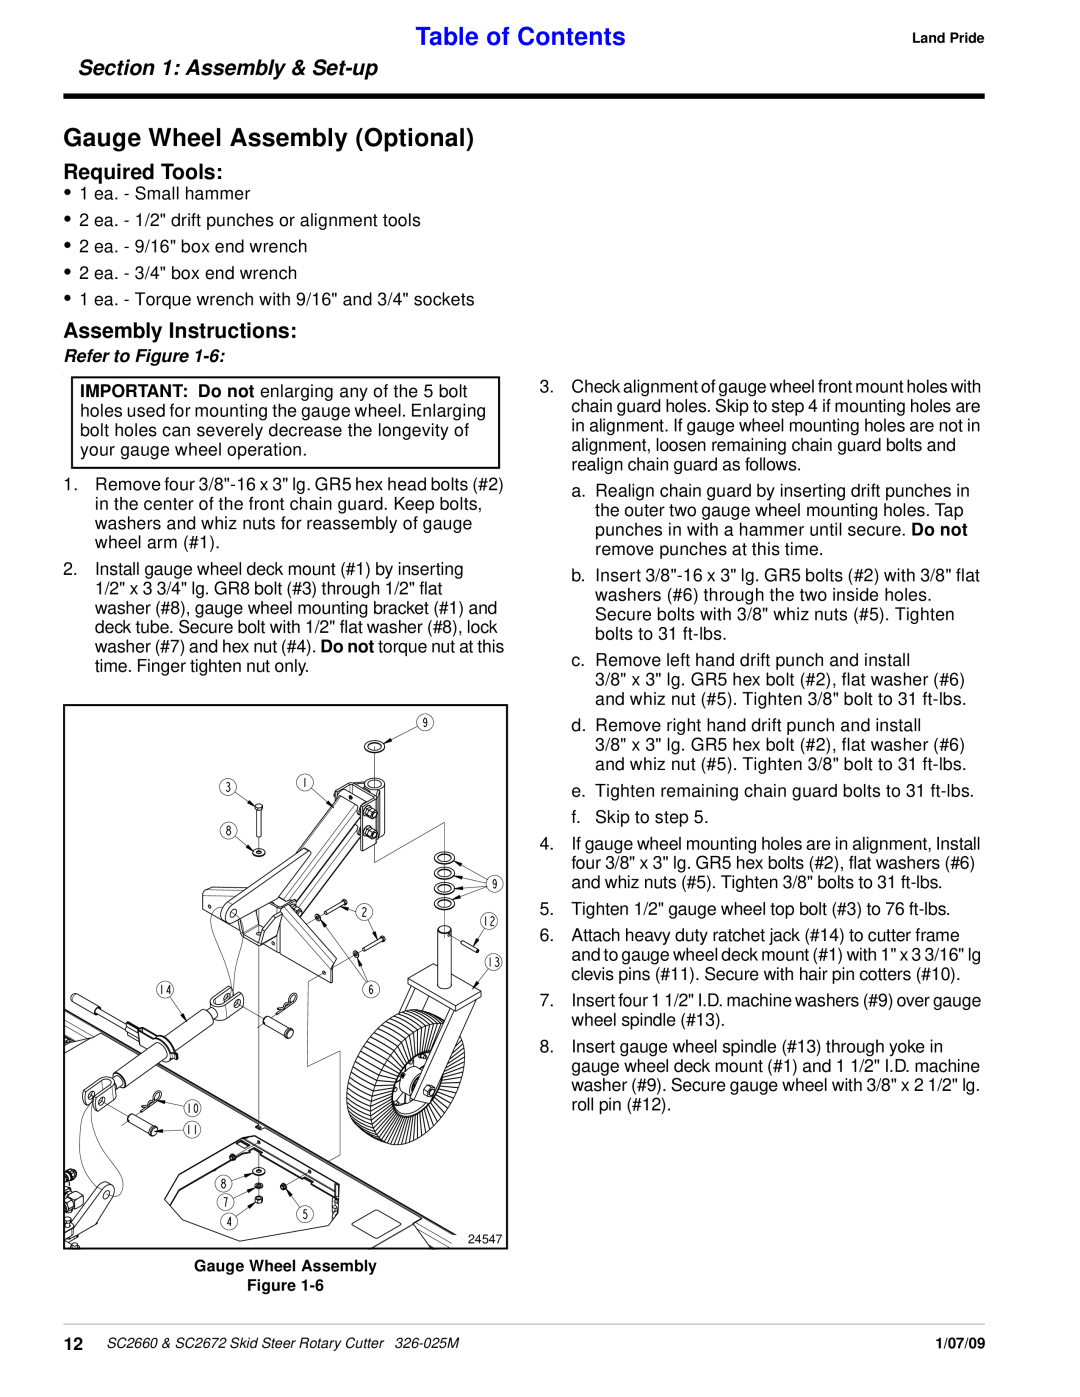 Land Pride SC2660 Gauge Wheel Assembly Optional, Required Tools, Assembly Instructions, Table of Contents, Refer to Figure 